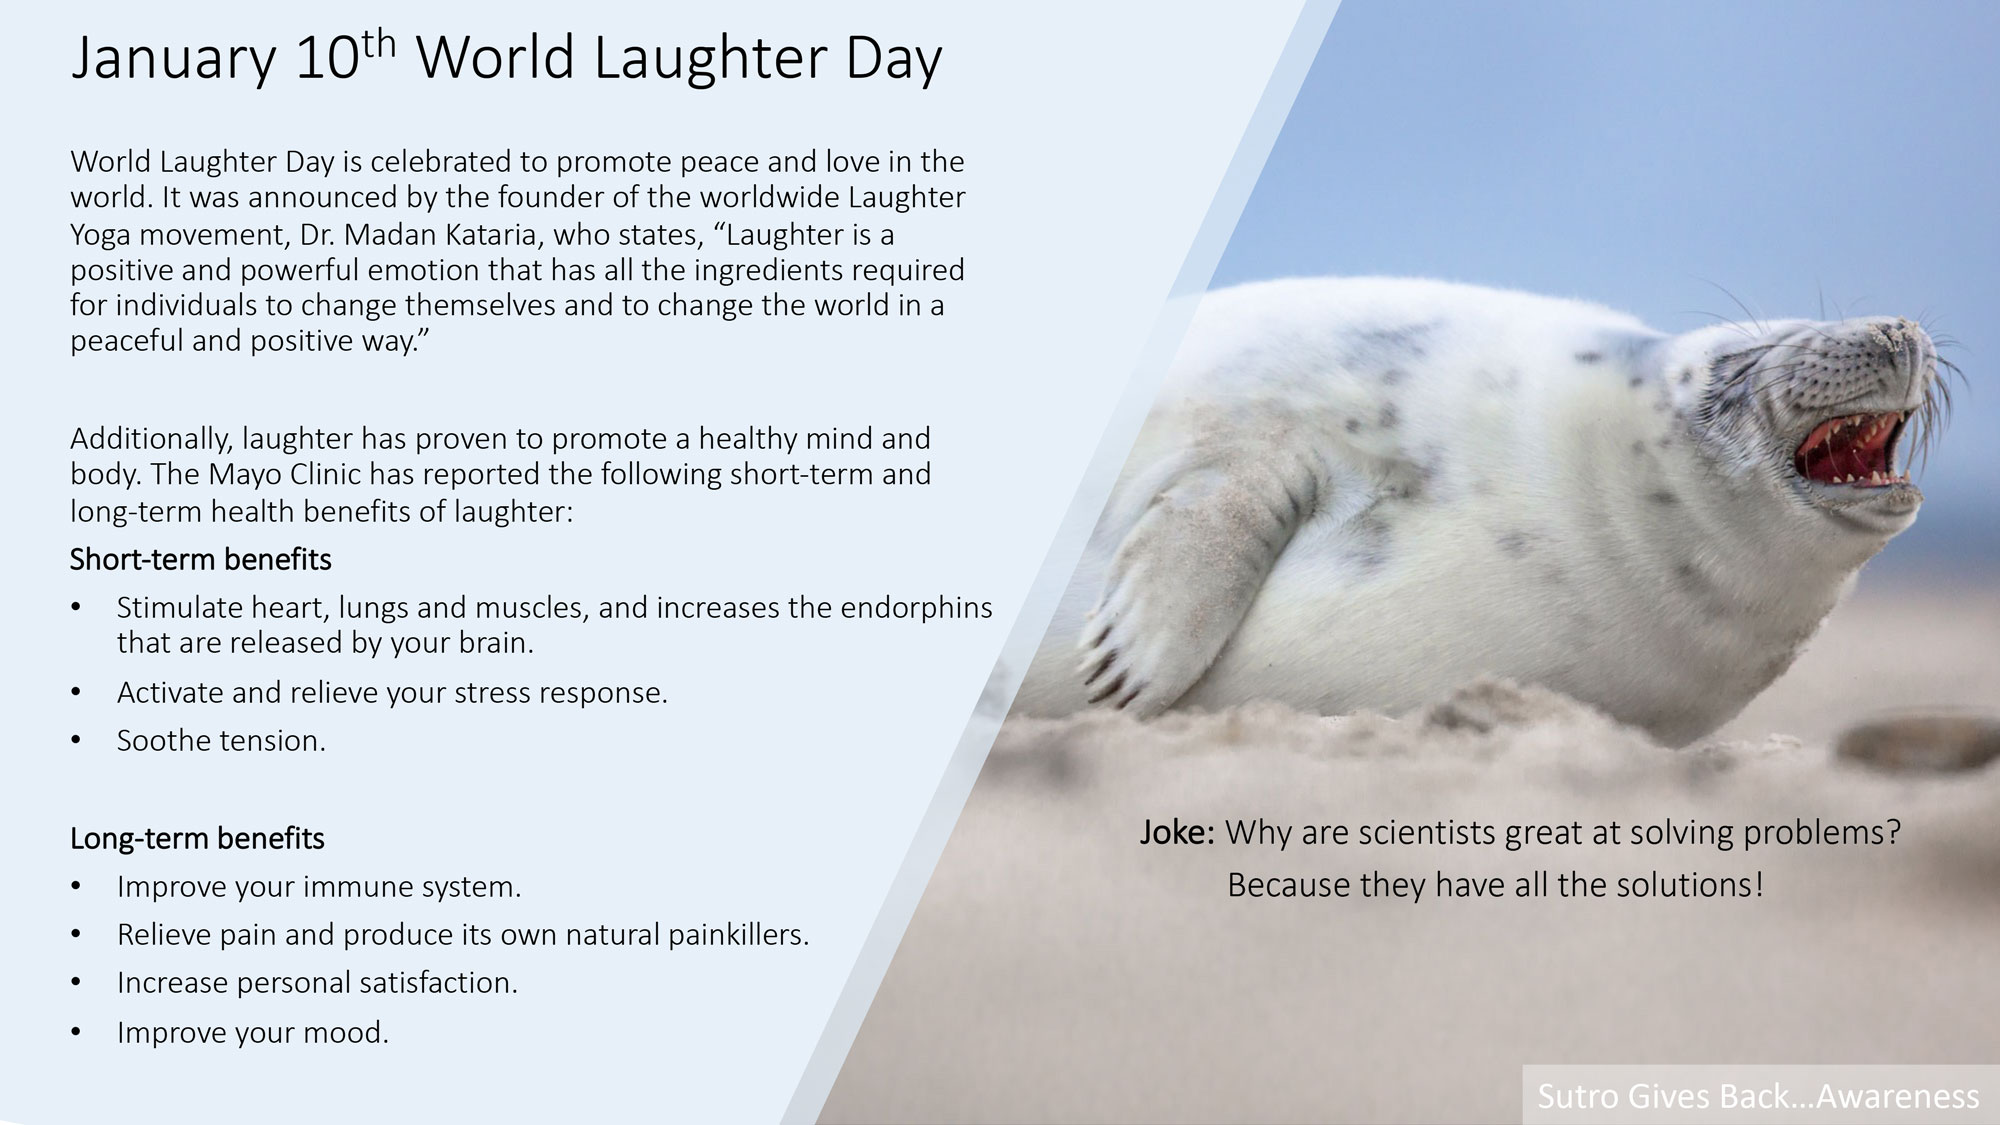 January 10th World Laughter Day